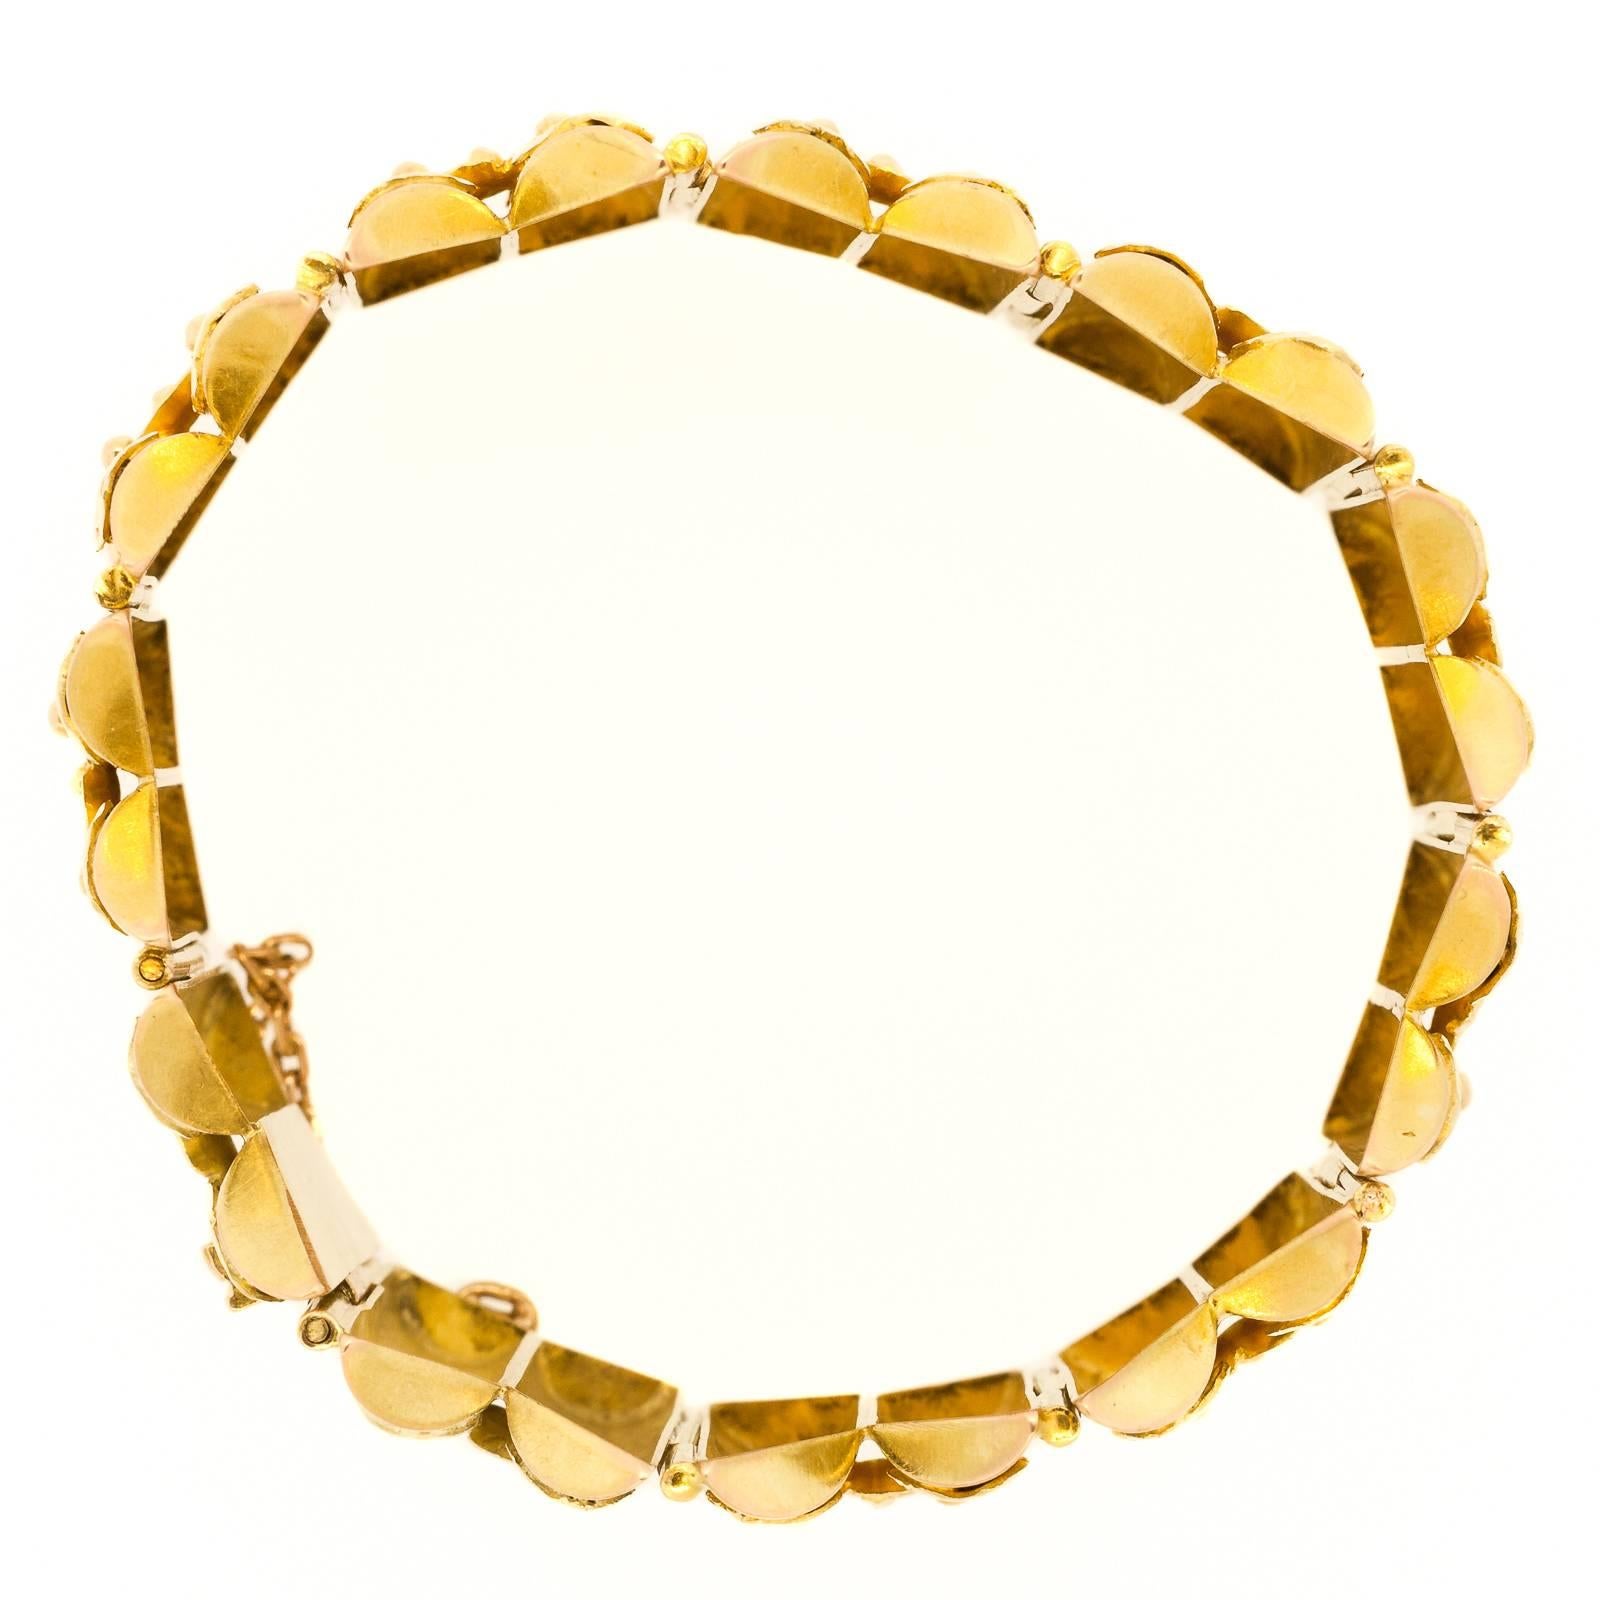 One of a kind unique vintage yellow & green gold wide bracelet is circa 1950’s. The one inch wide bracelet is designed as folding screens and fabricated in 14KT yellow with 14KT green gold applied leaf.

SKU:  B494